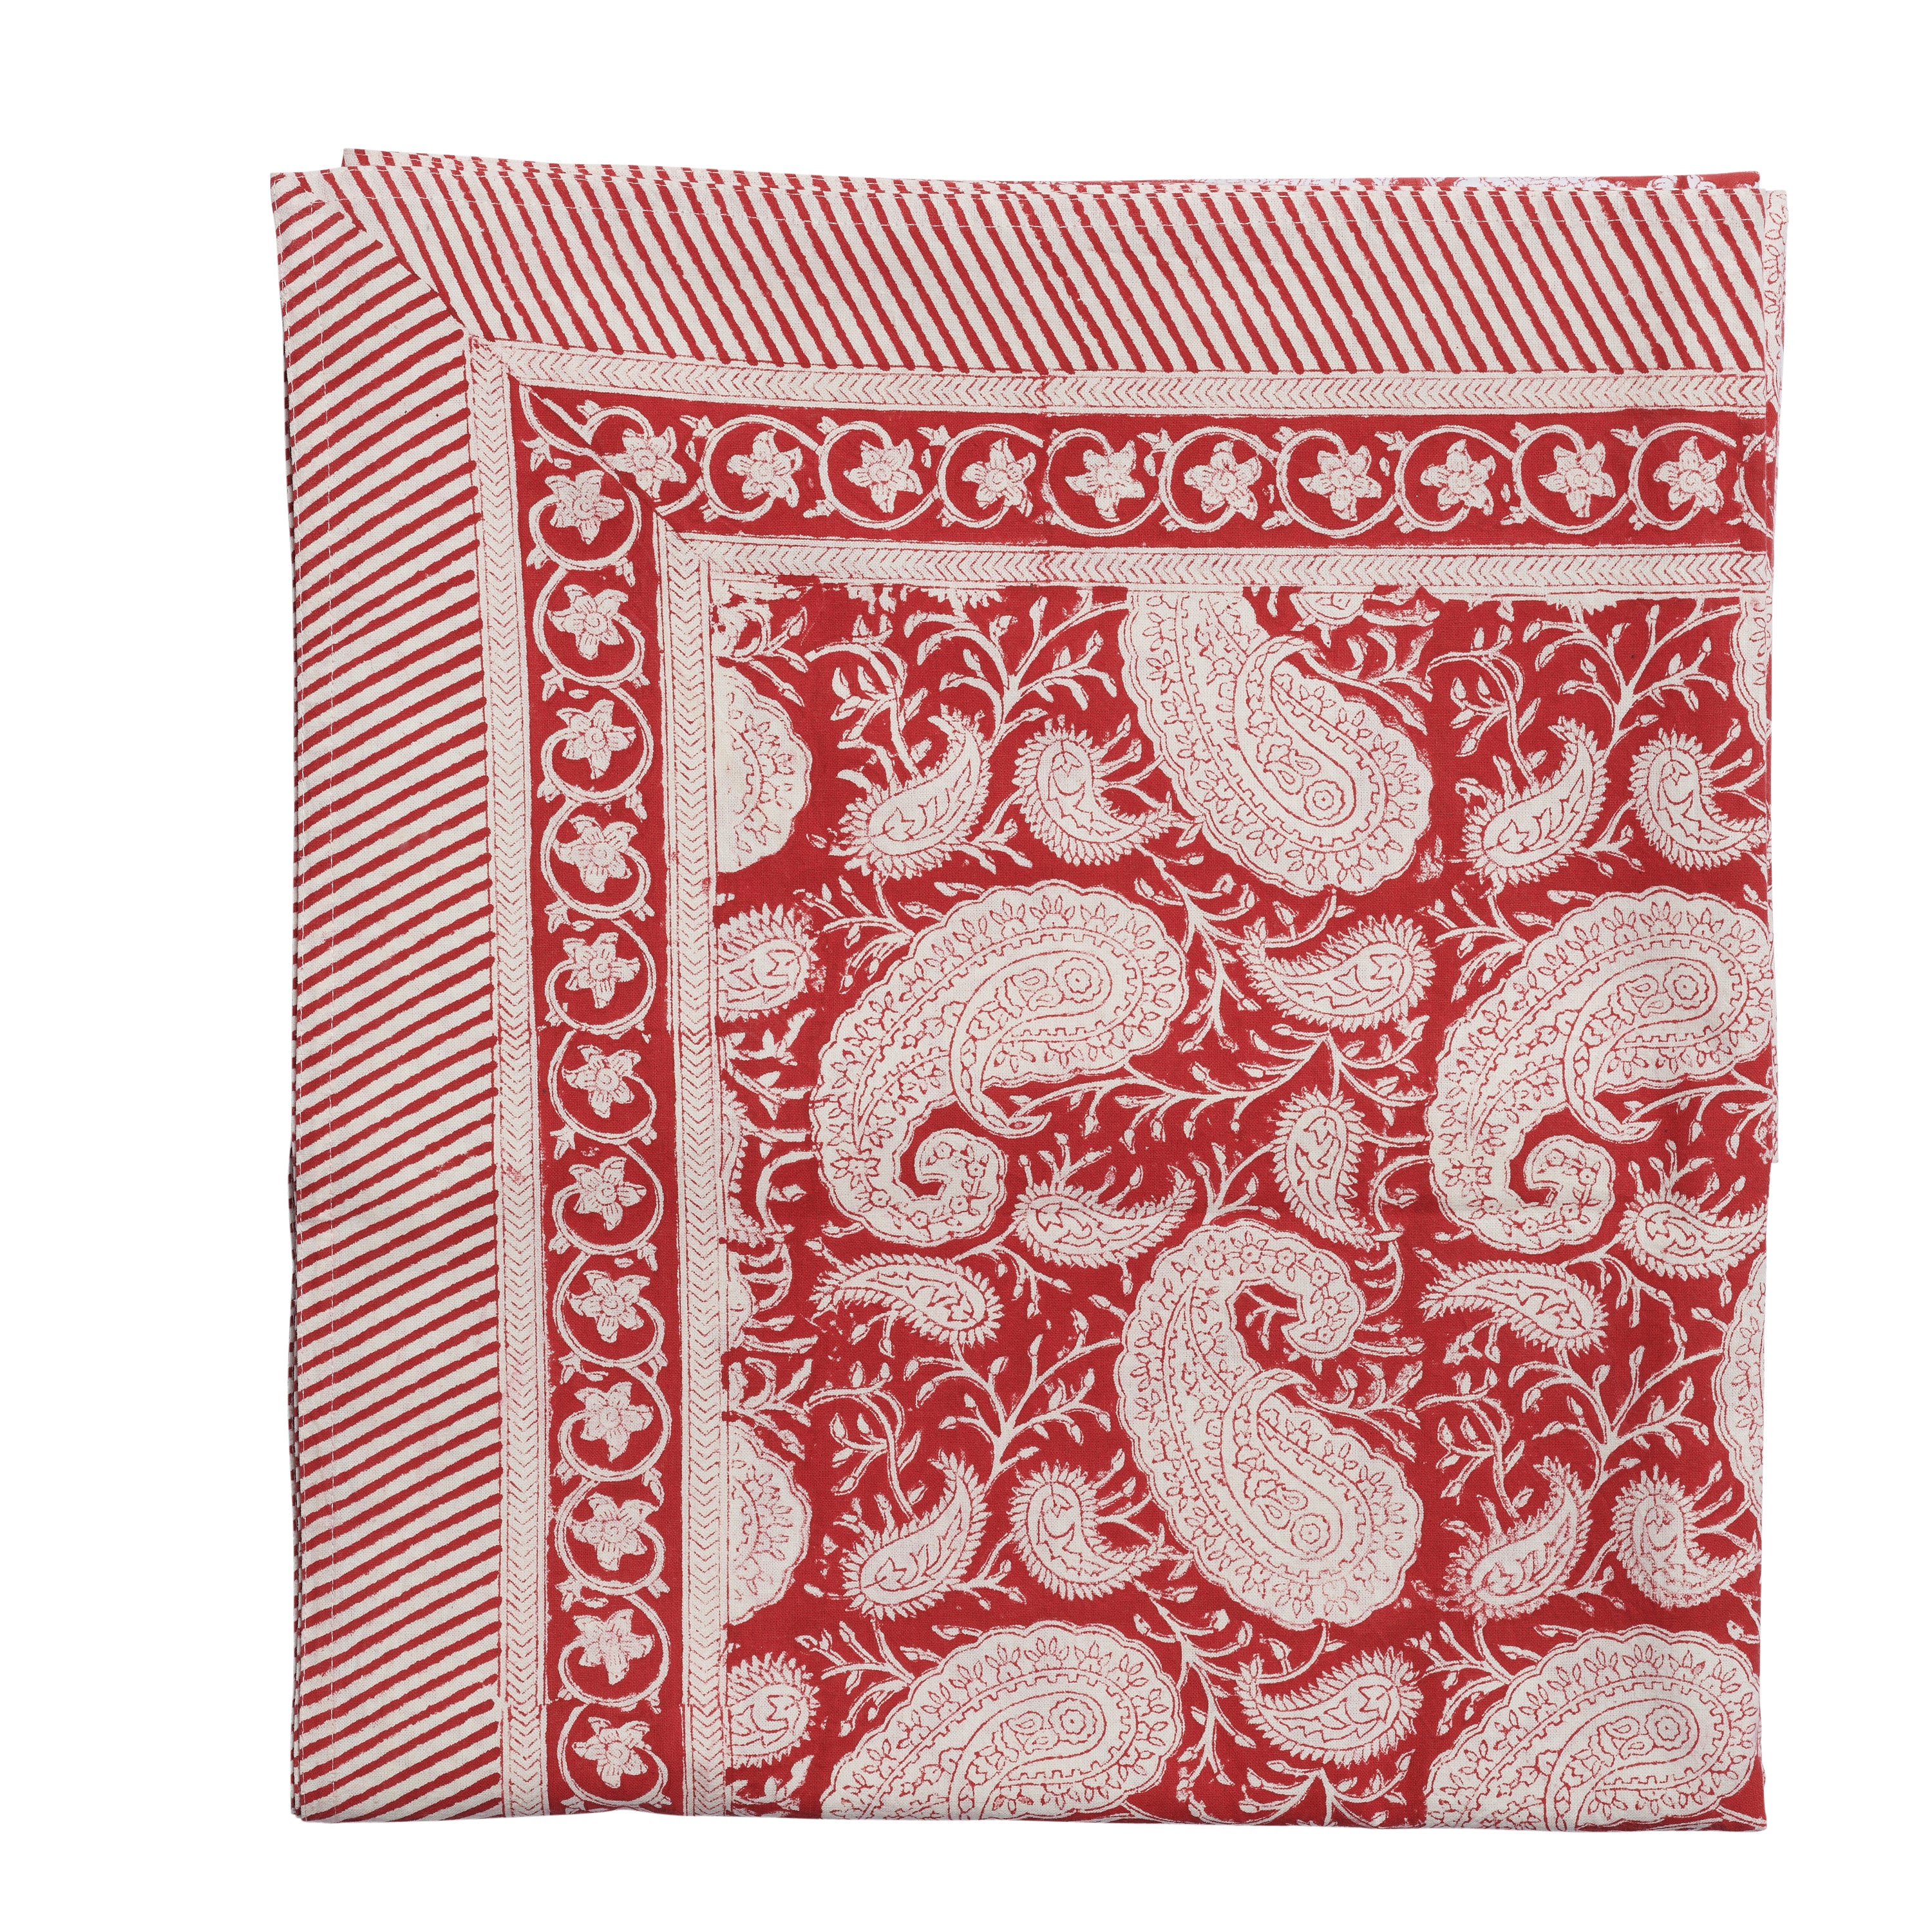 Tablecloth with Big Paisley® print in Red